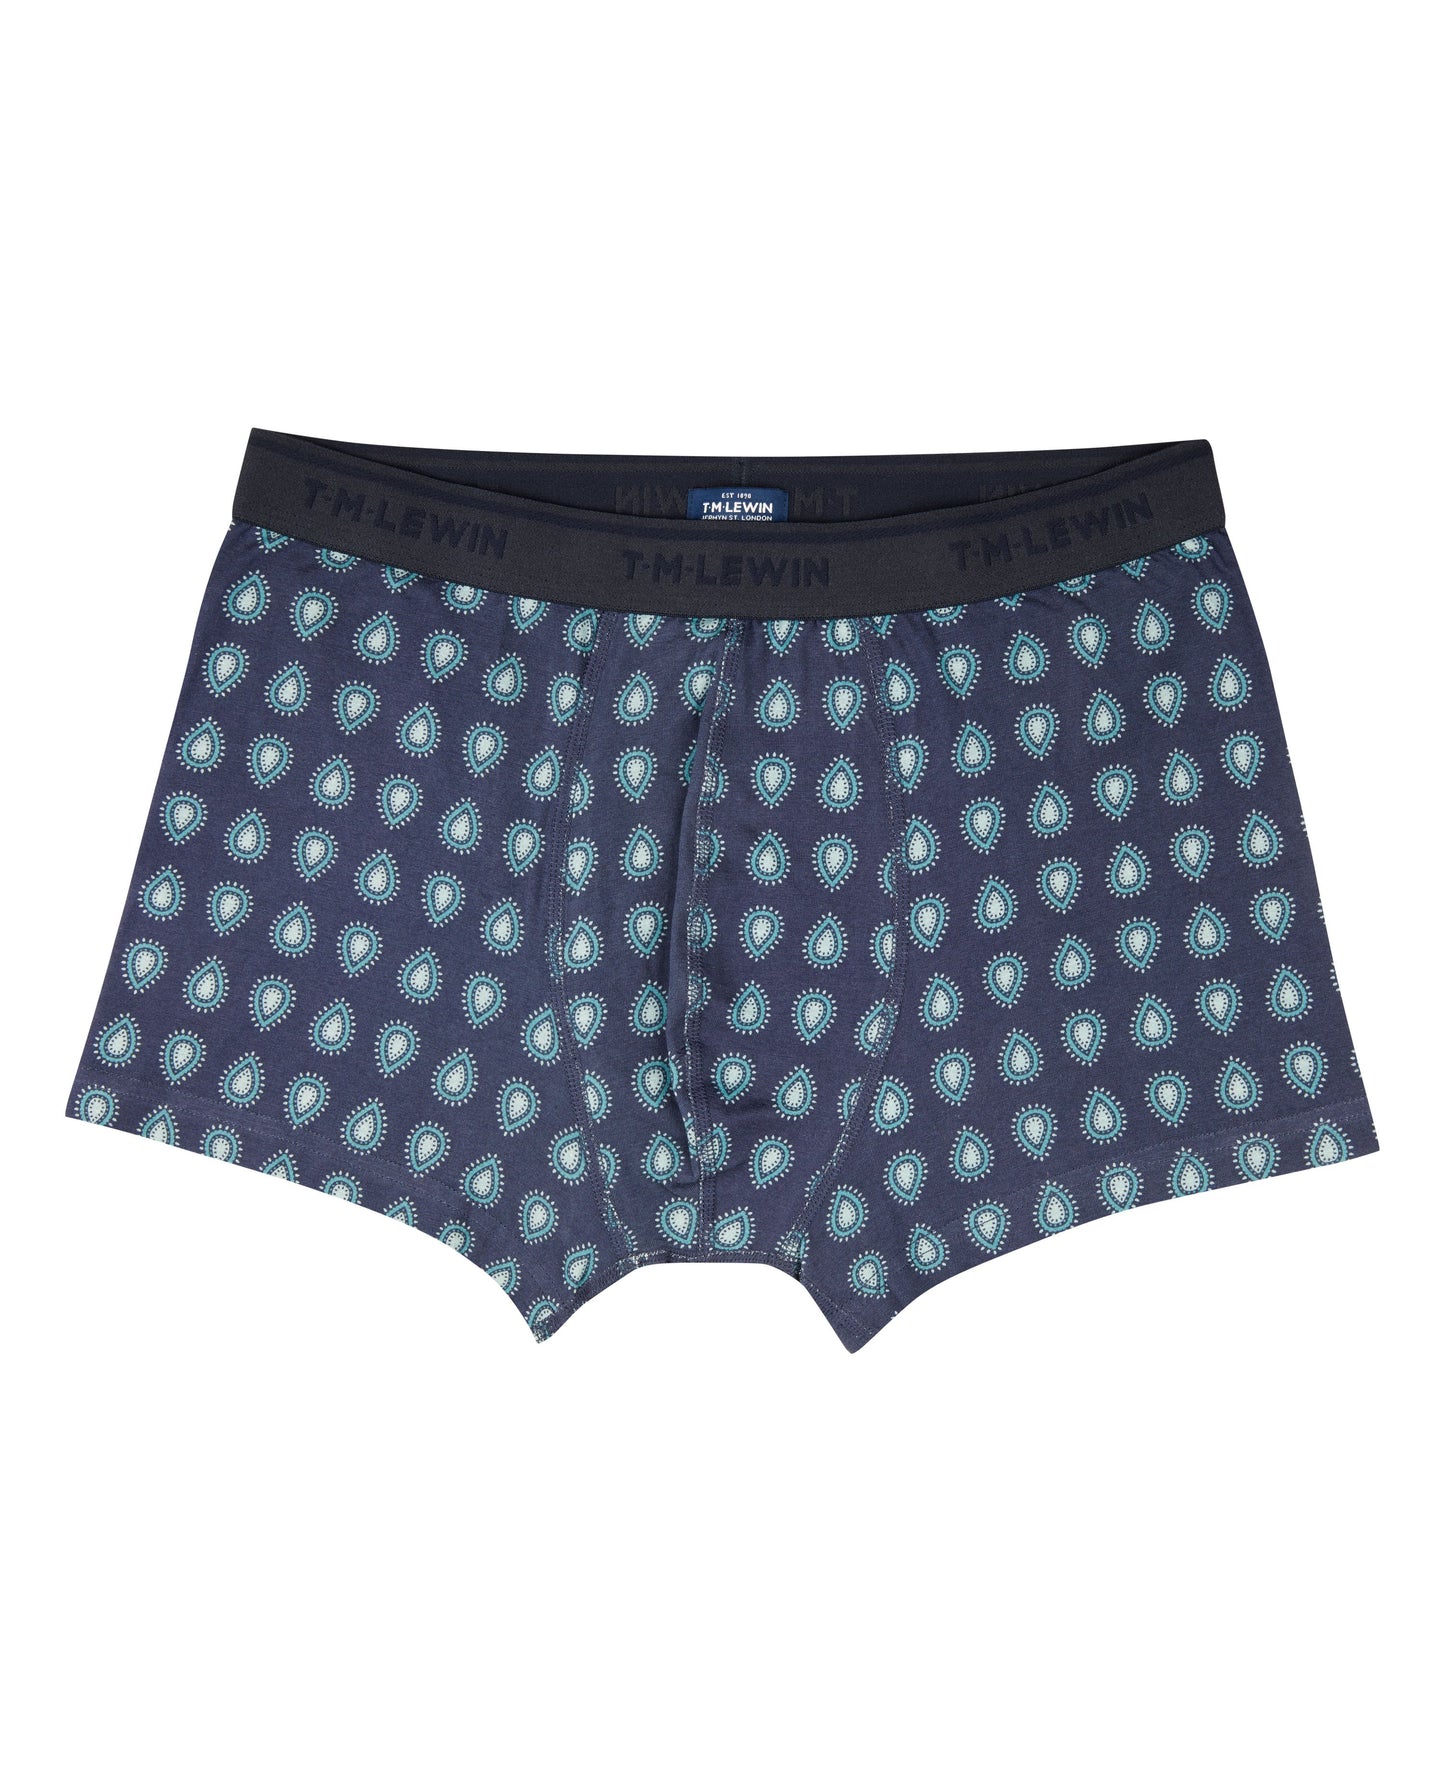 Image 1 of Navy and Blue Paisley Cotton Stretch Boxers